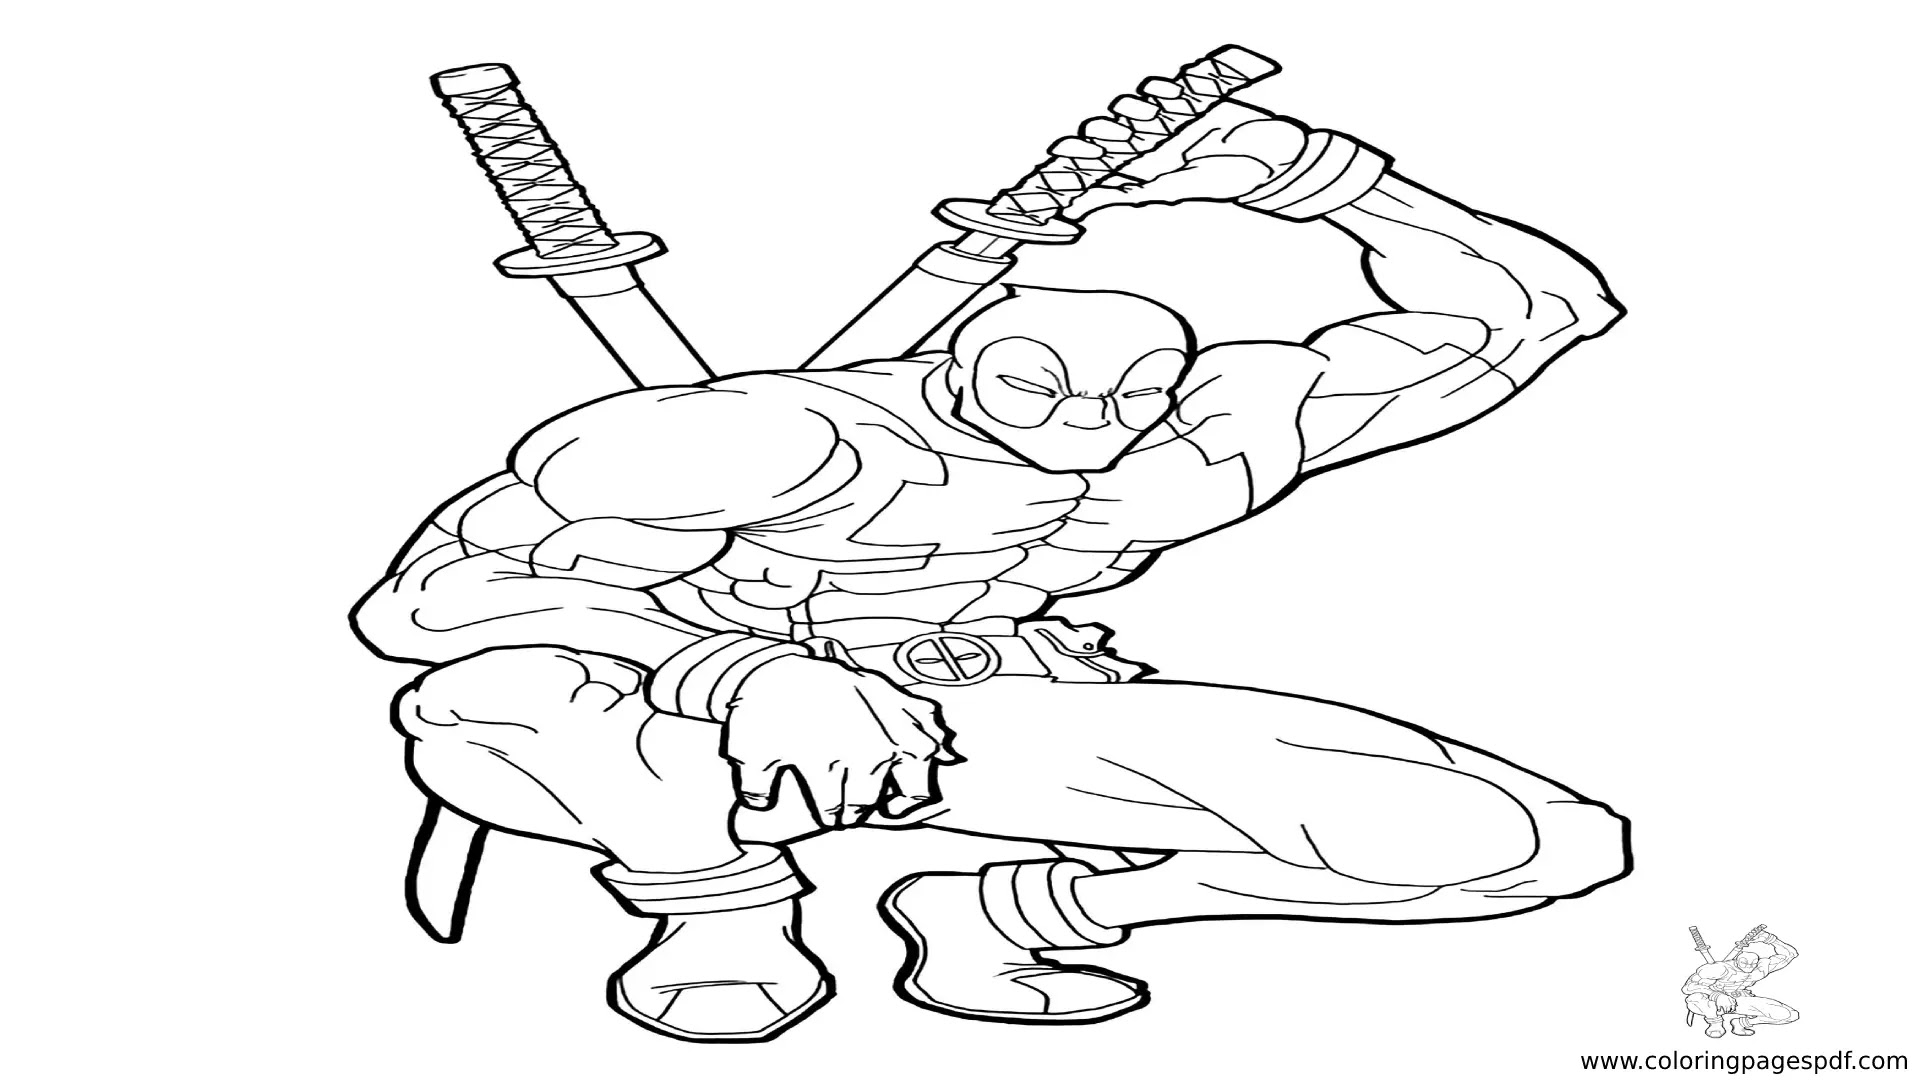 Marvel Coloring Pages Online